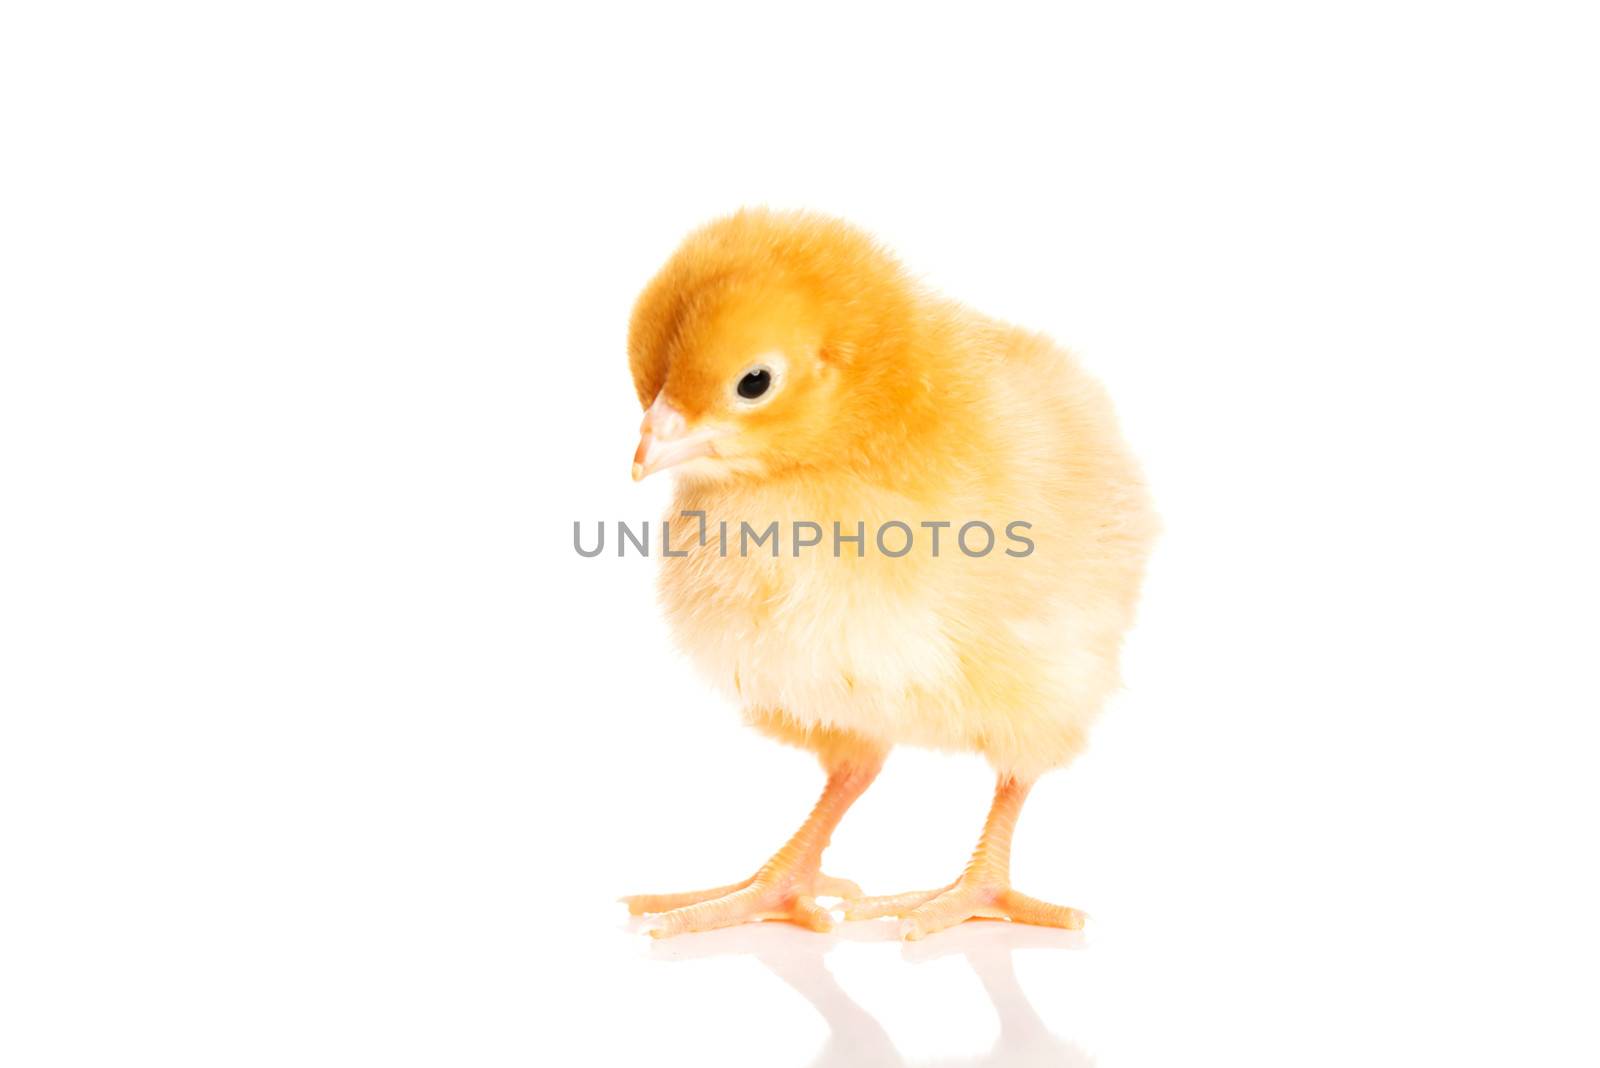 Small yellow Easter chick. by BDS